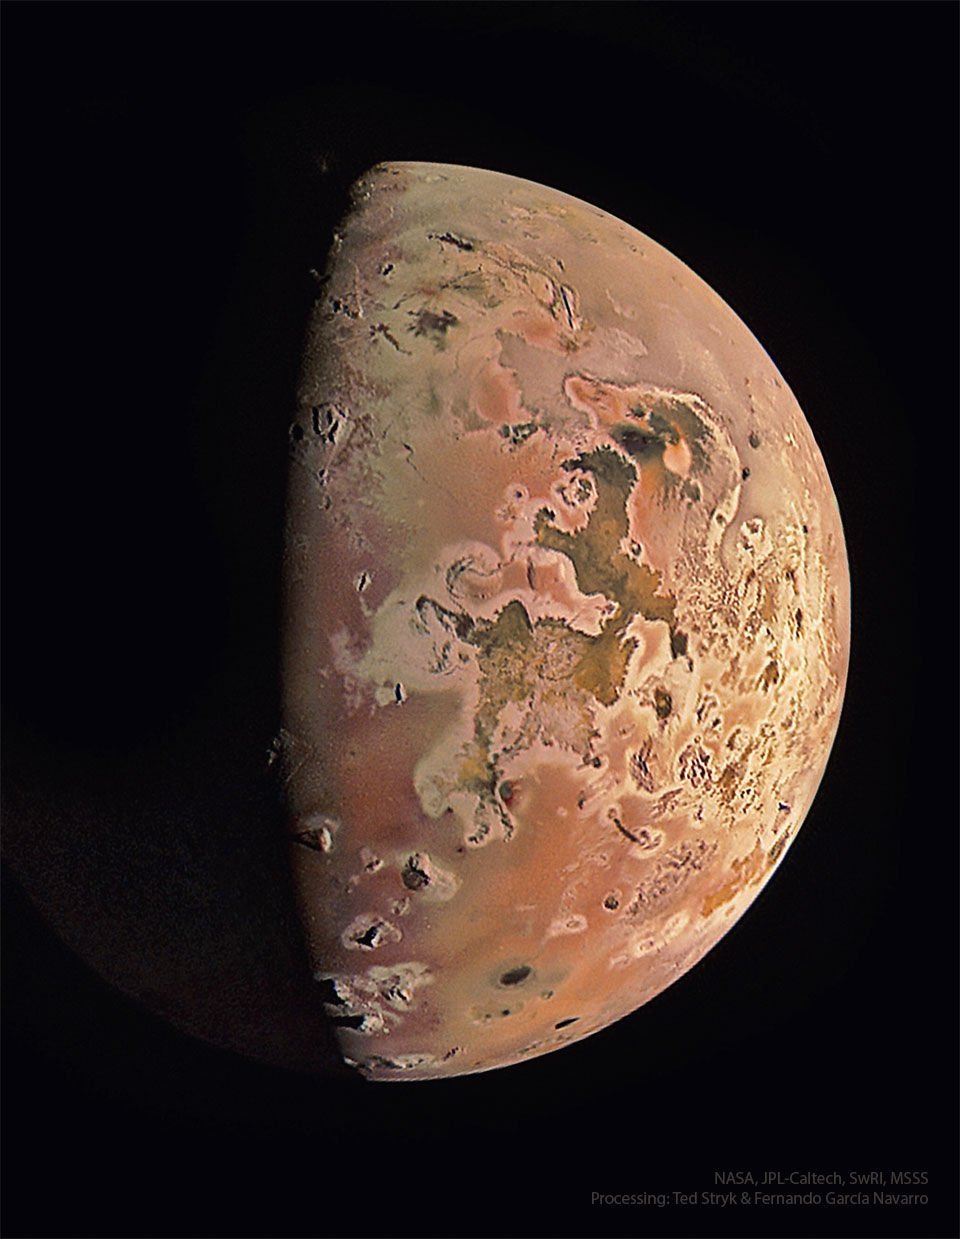 Jupiter's moon Io is shown as photogaphred recently
by NASA's passing Juno spacecraft. The moon is nearly half-
lit by the distant Sun and shows a complex surface including
the colours yellow, orange, and dark brown. Near the top, the
plume of an active volcano can be seen.
Please see the explanation for more detailed information.